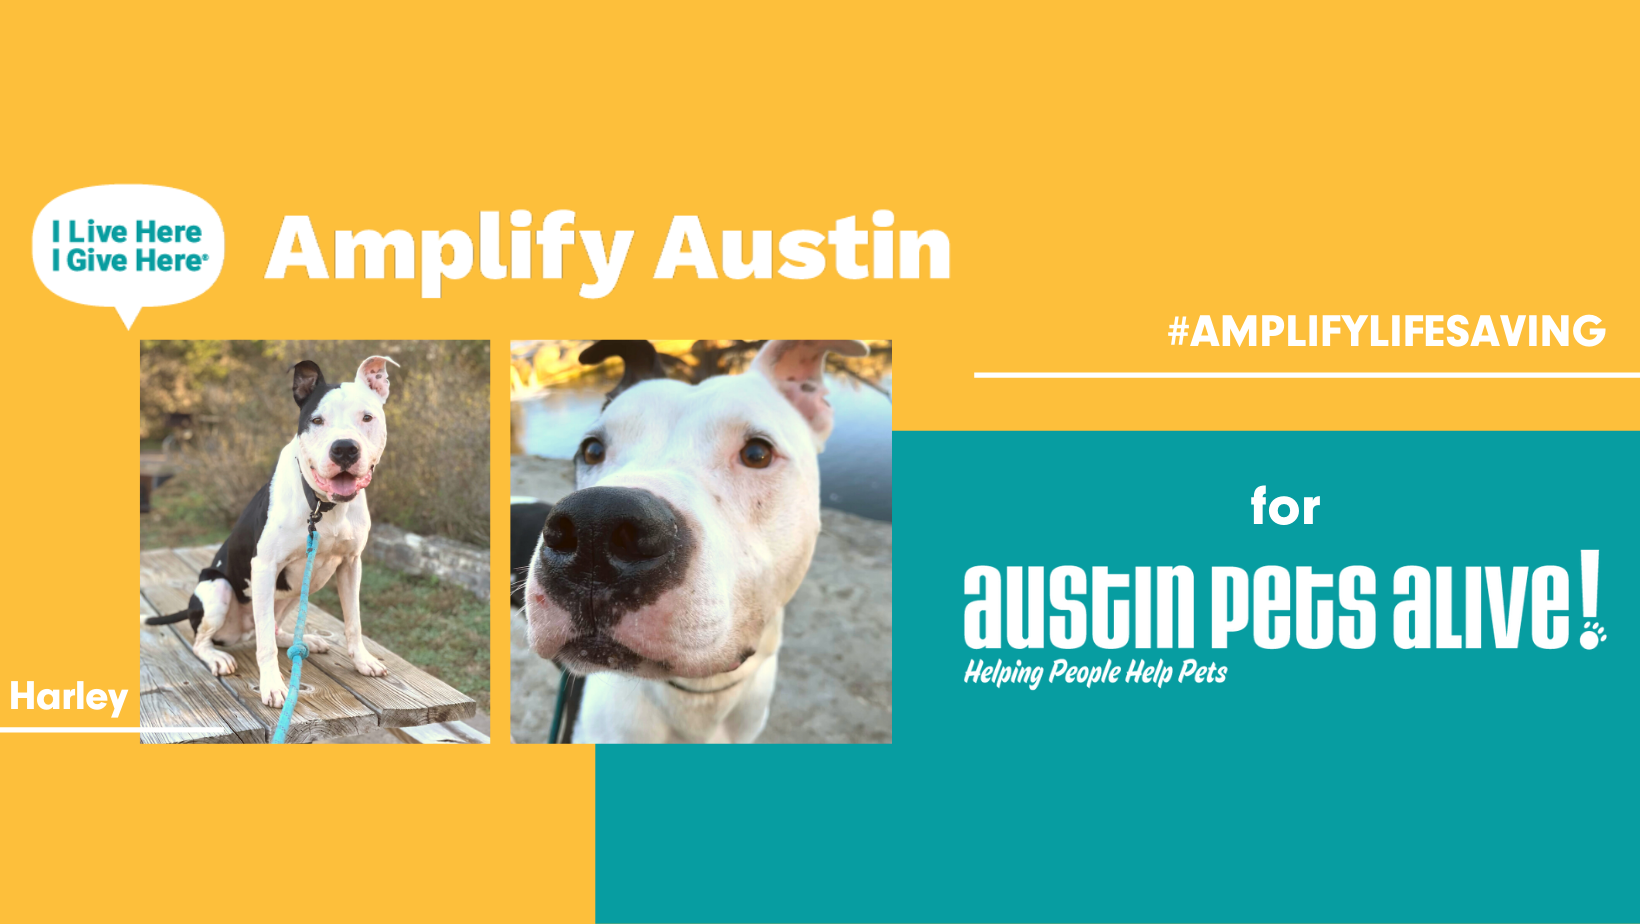 How To Make a Fundraiser for Amplify Austin